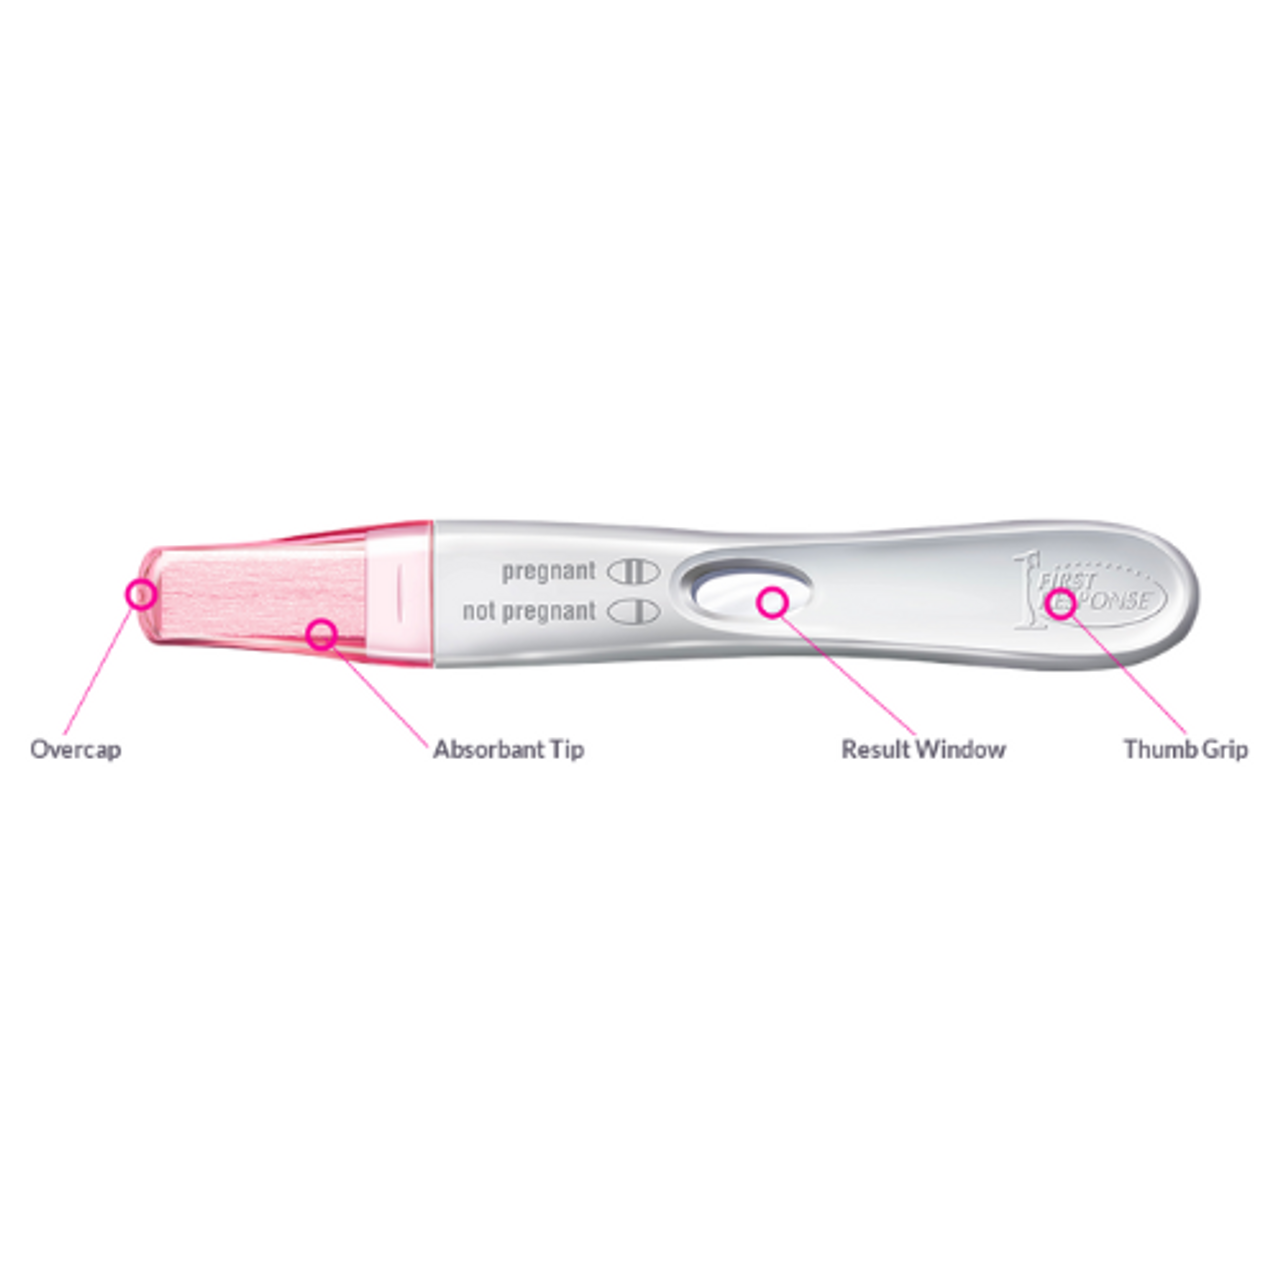 Buy First Response early detection pregnancy tests | Condom Depot